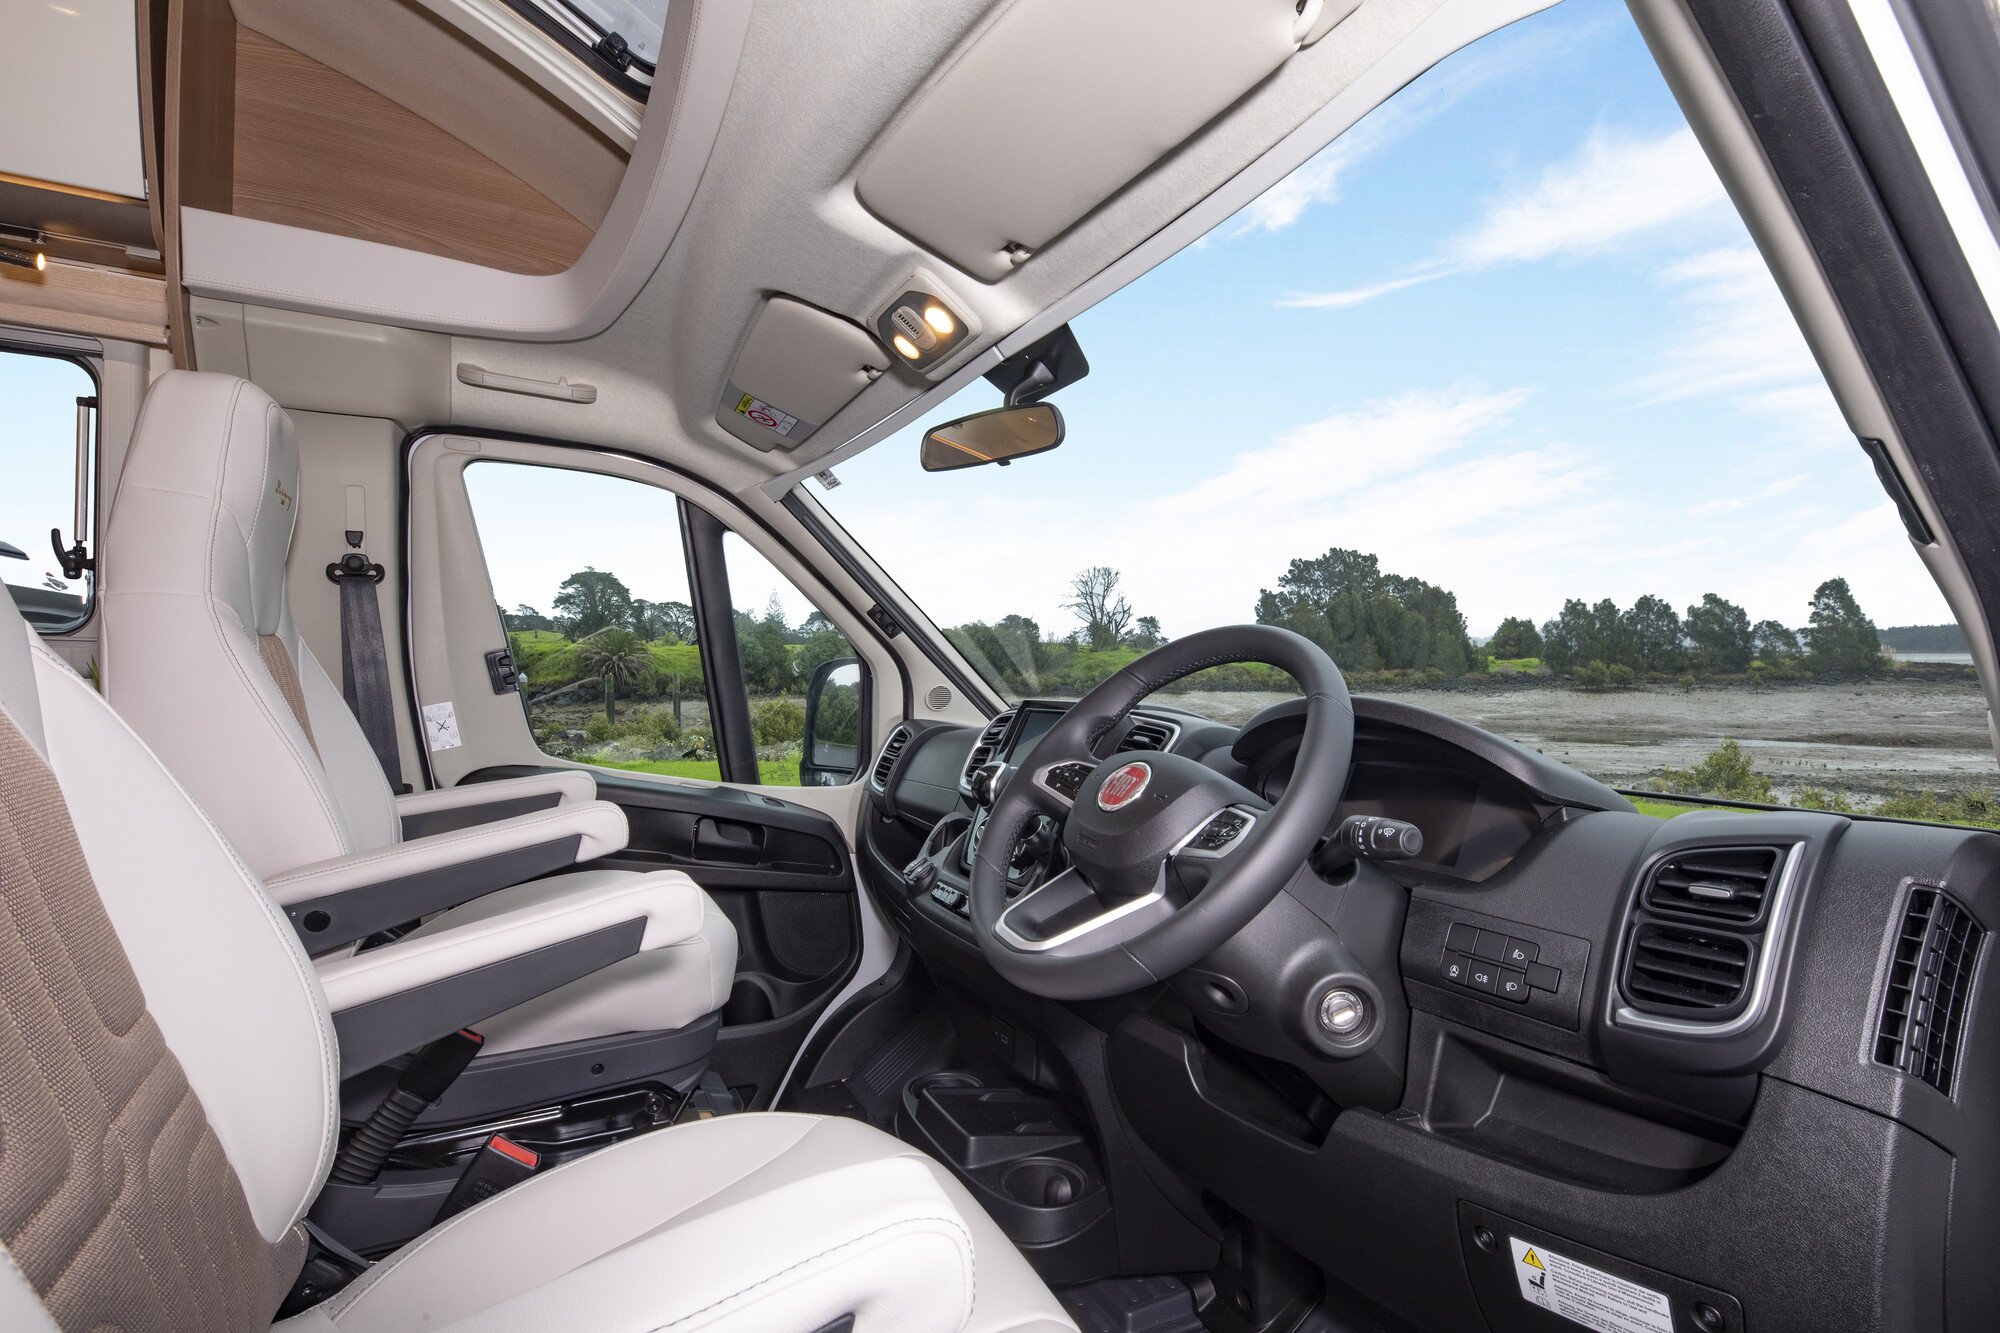 All About the Fiat Ducato Series 8 Motorhome Platform